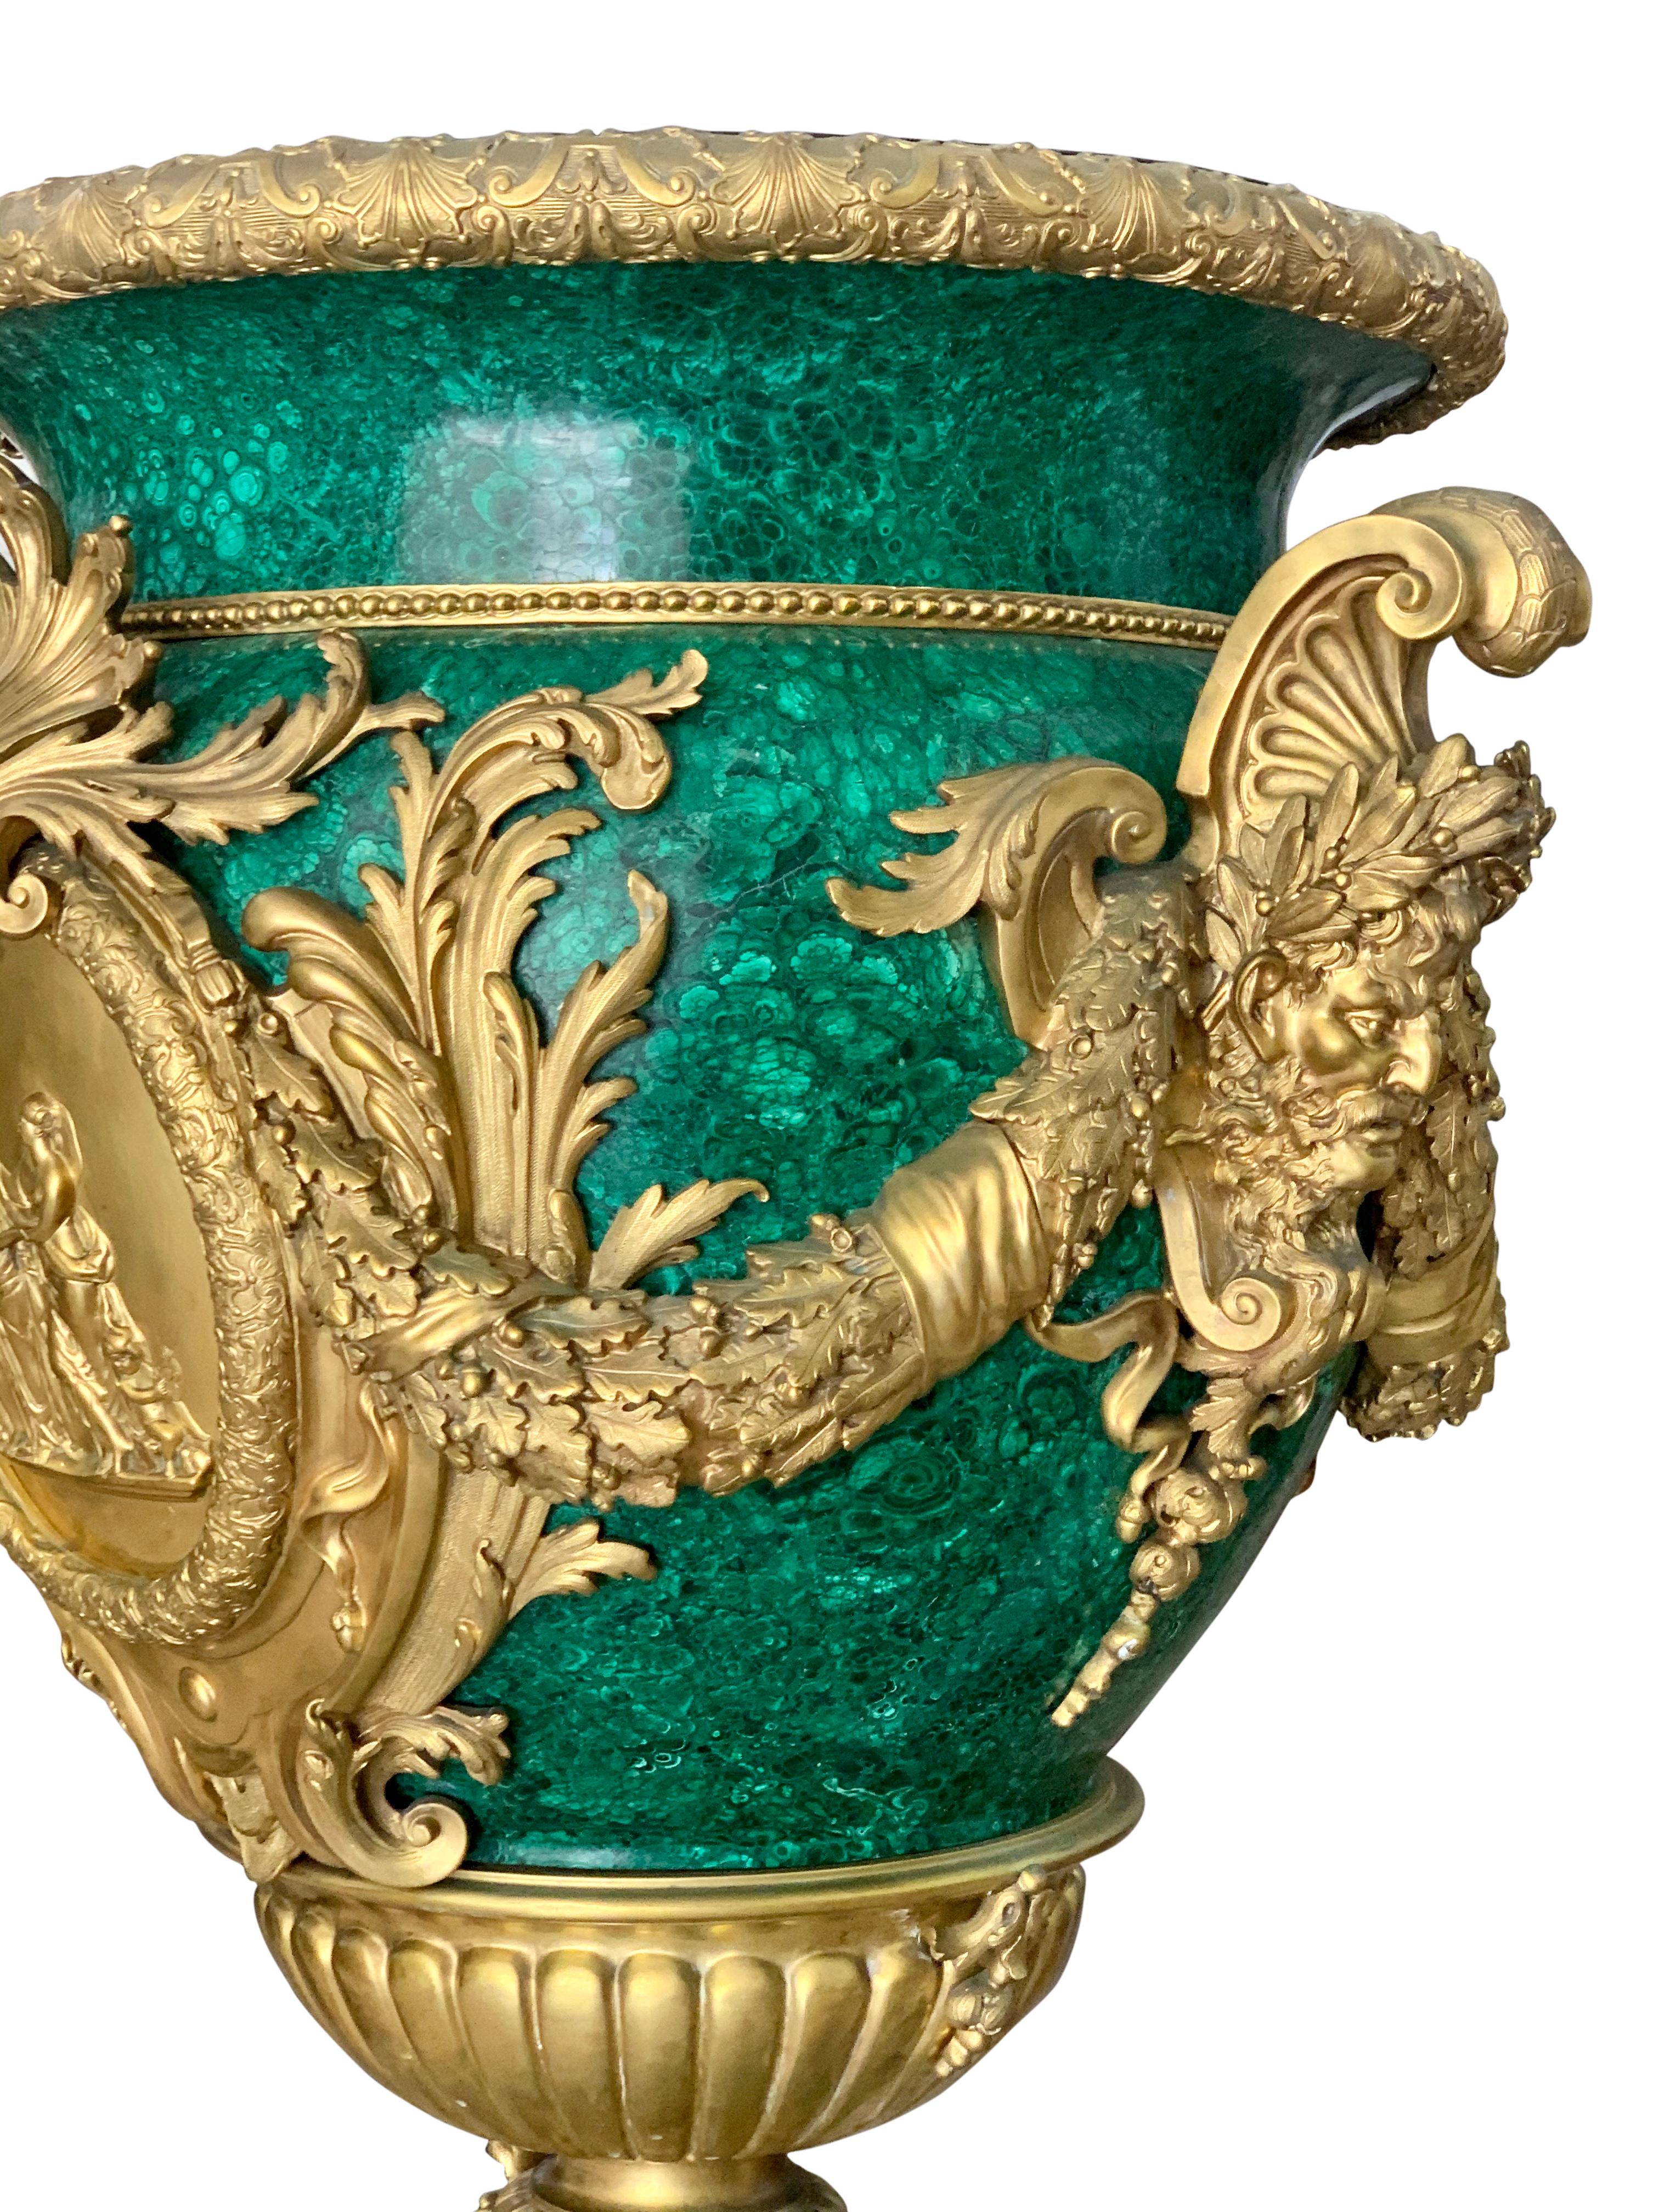 Pair of Monumental Gilt Bronze-Mounted Malachite Urns In Good Condition For Sale In Los Angeles, CA